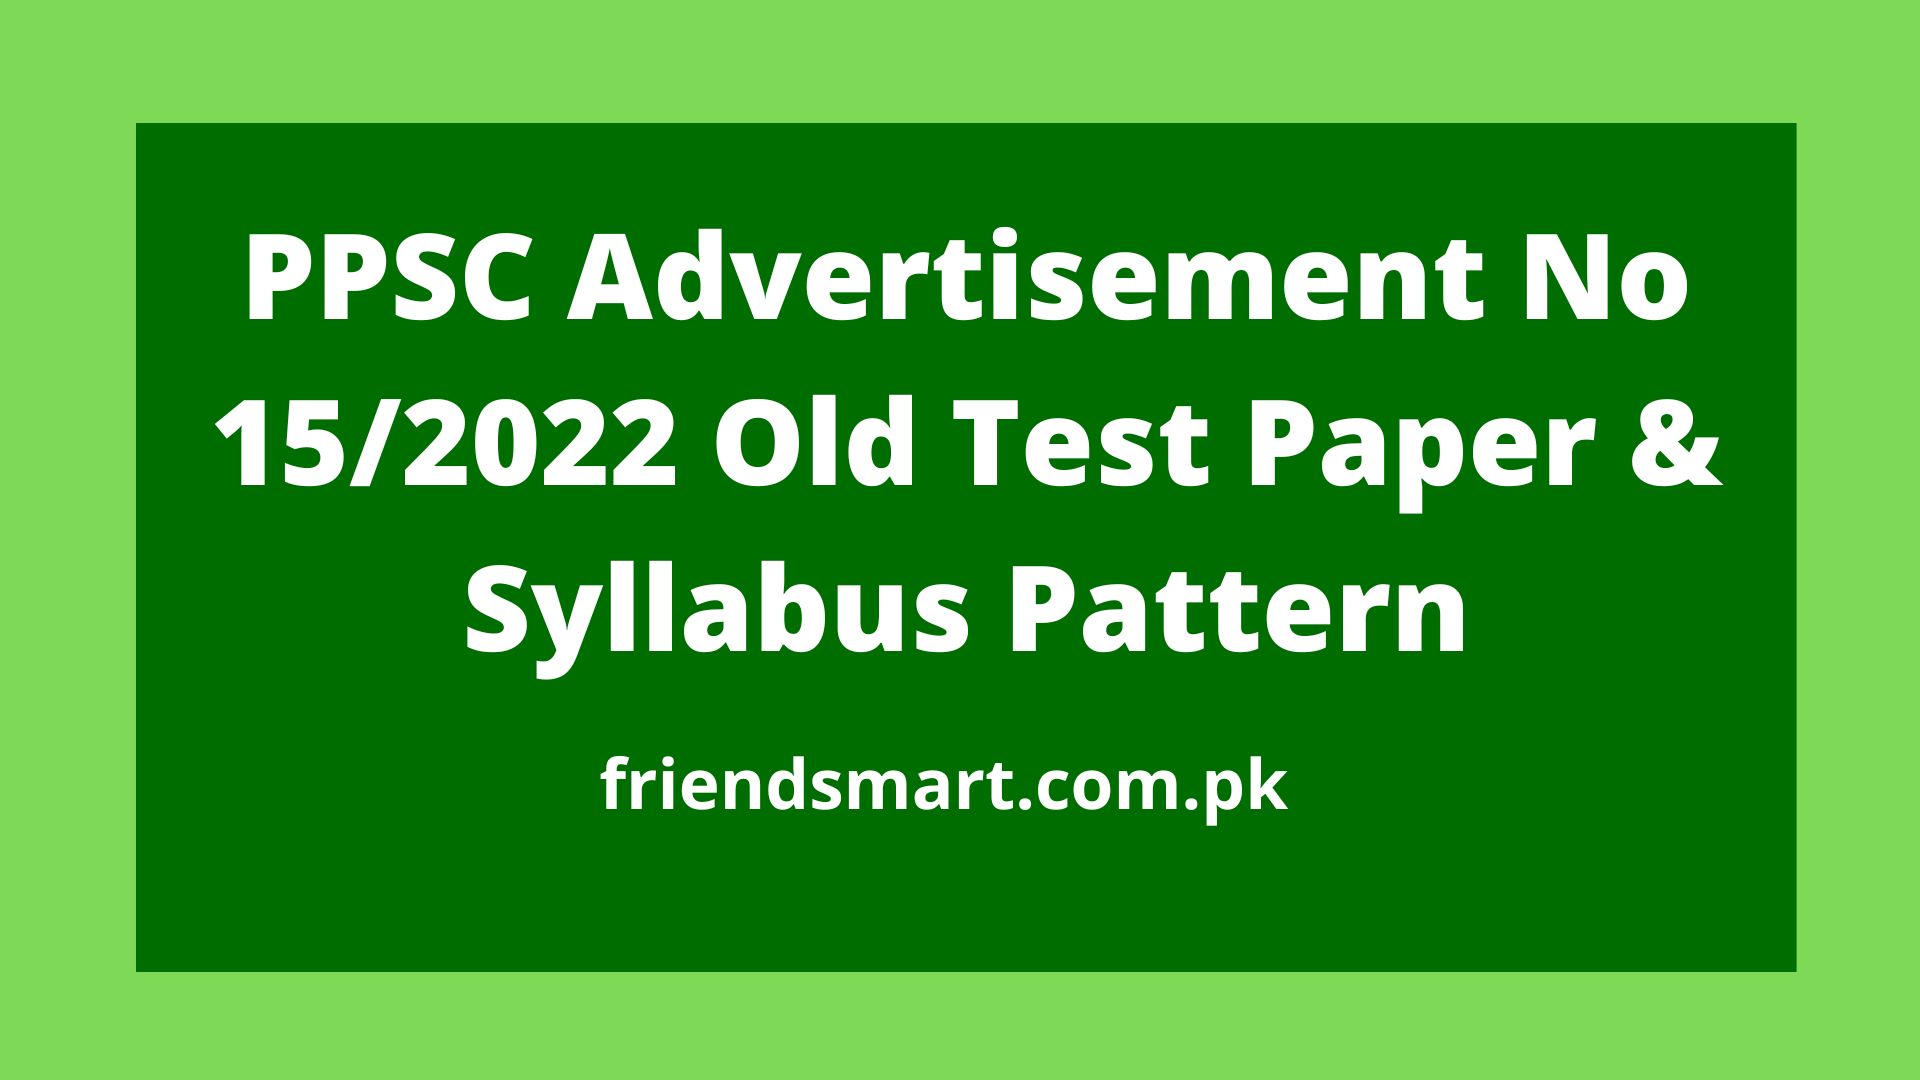 PPSC Advertisement No 15/2023 Old Test Paper & Syllabus Pattern